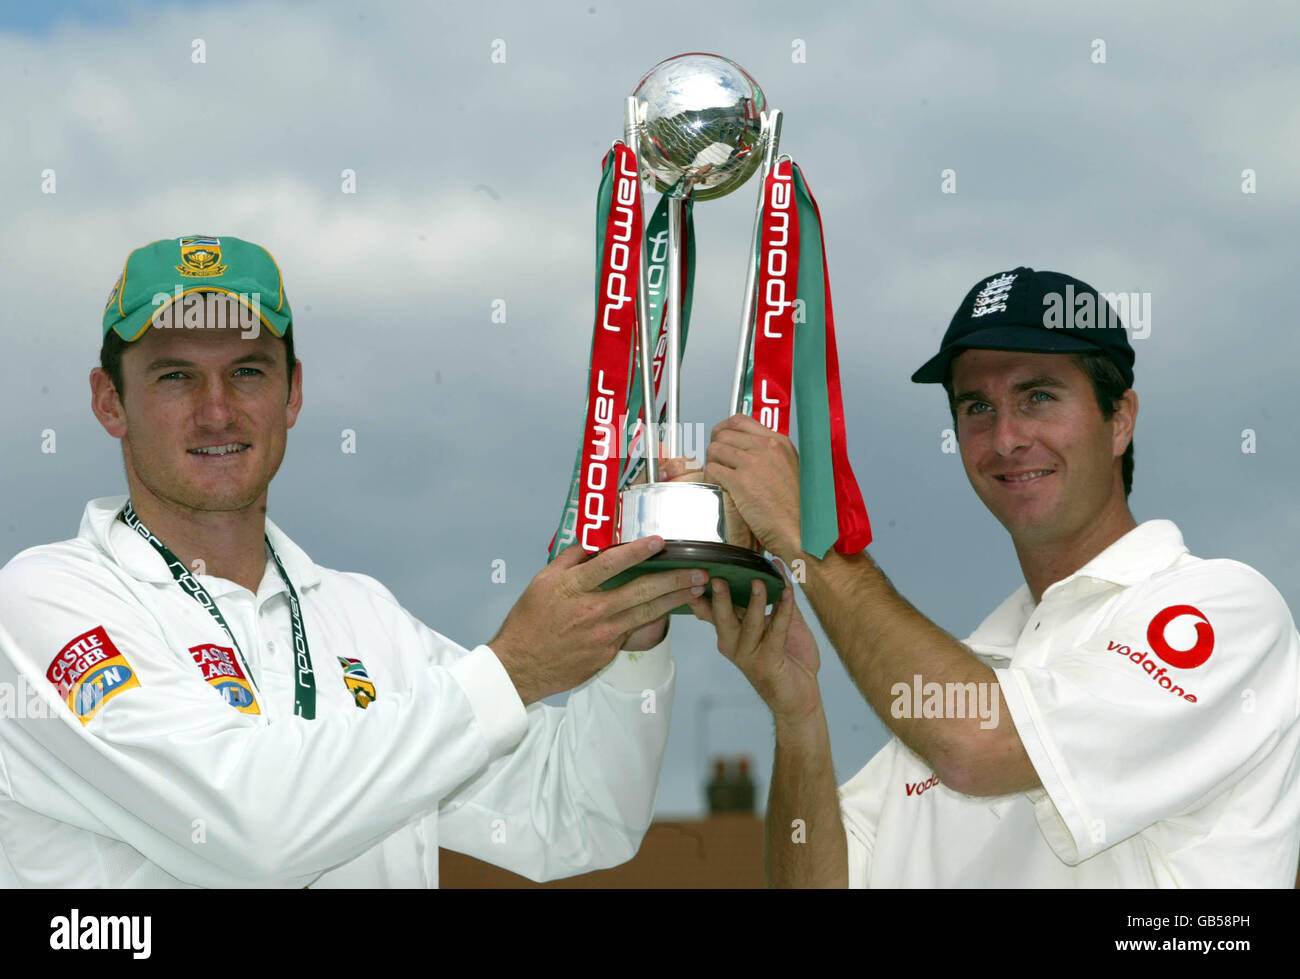 England's Captain Michael Vaughan and South Africa's Captain Graeme Smith jointly hold the npower trophy Stock Photo